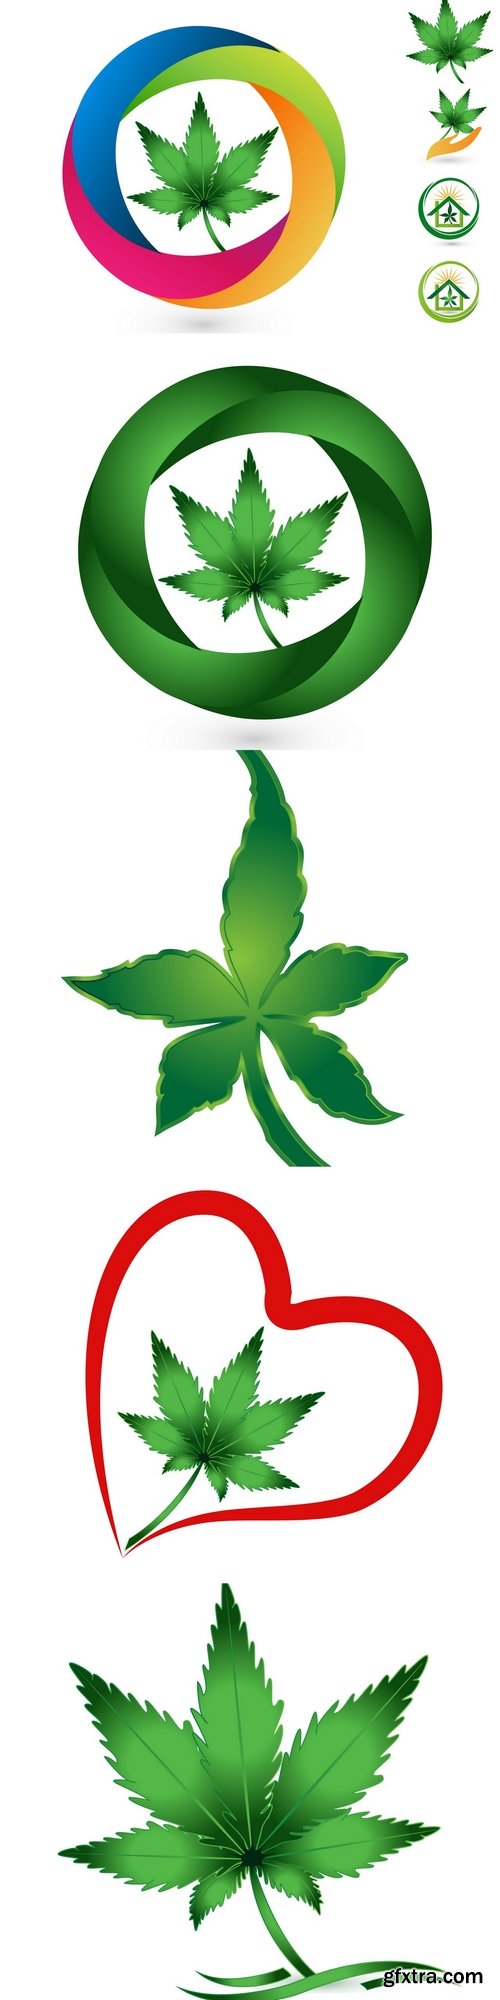 Cannabis leaf in circle swooshes vector icon design